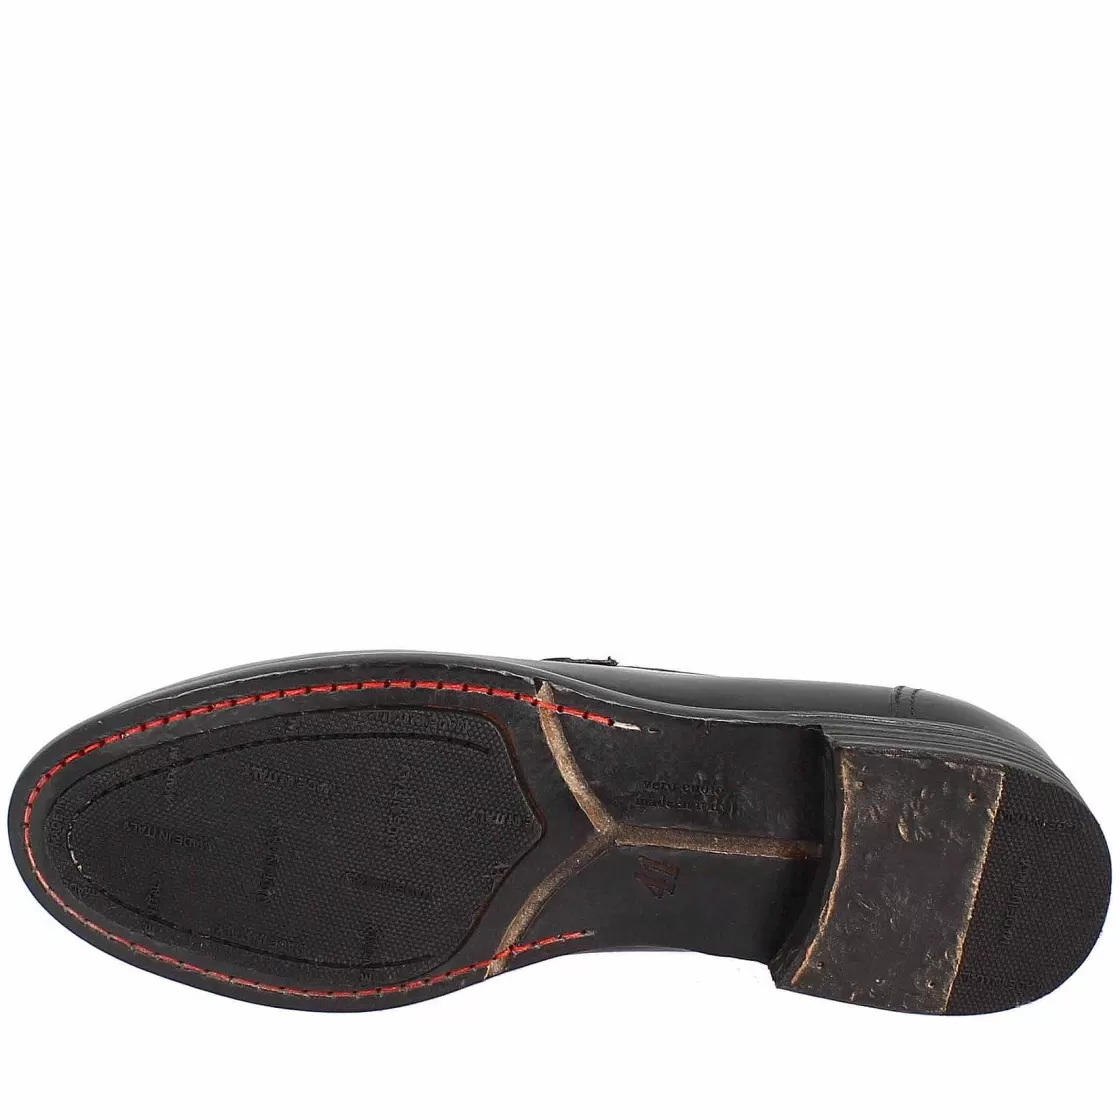 Leonardo Moccasin In Black Leather With Red Border Outlet